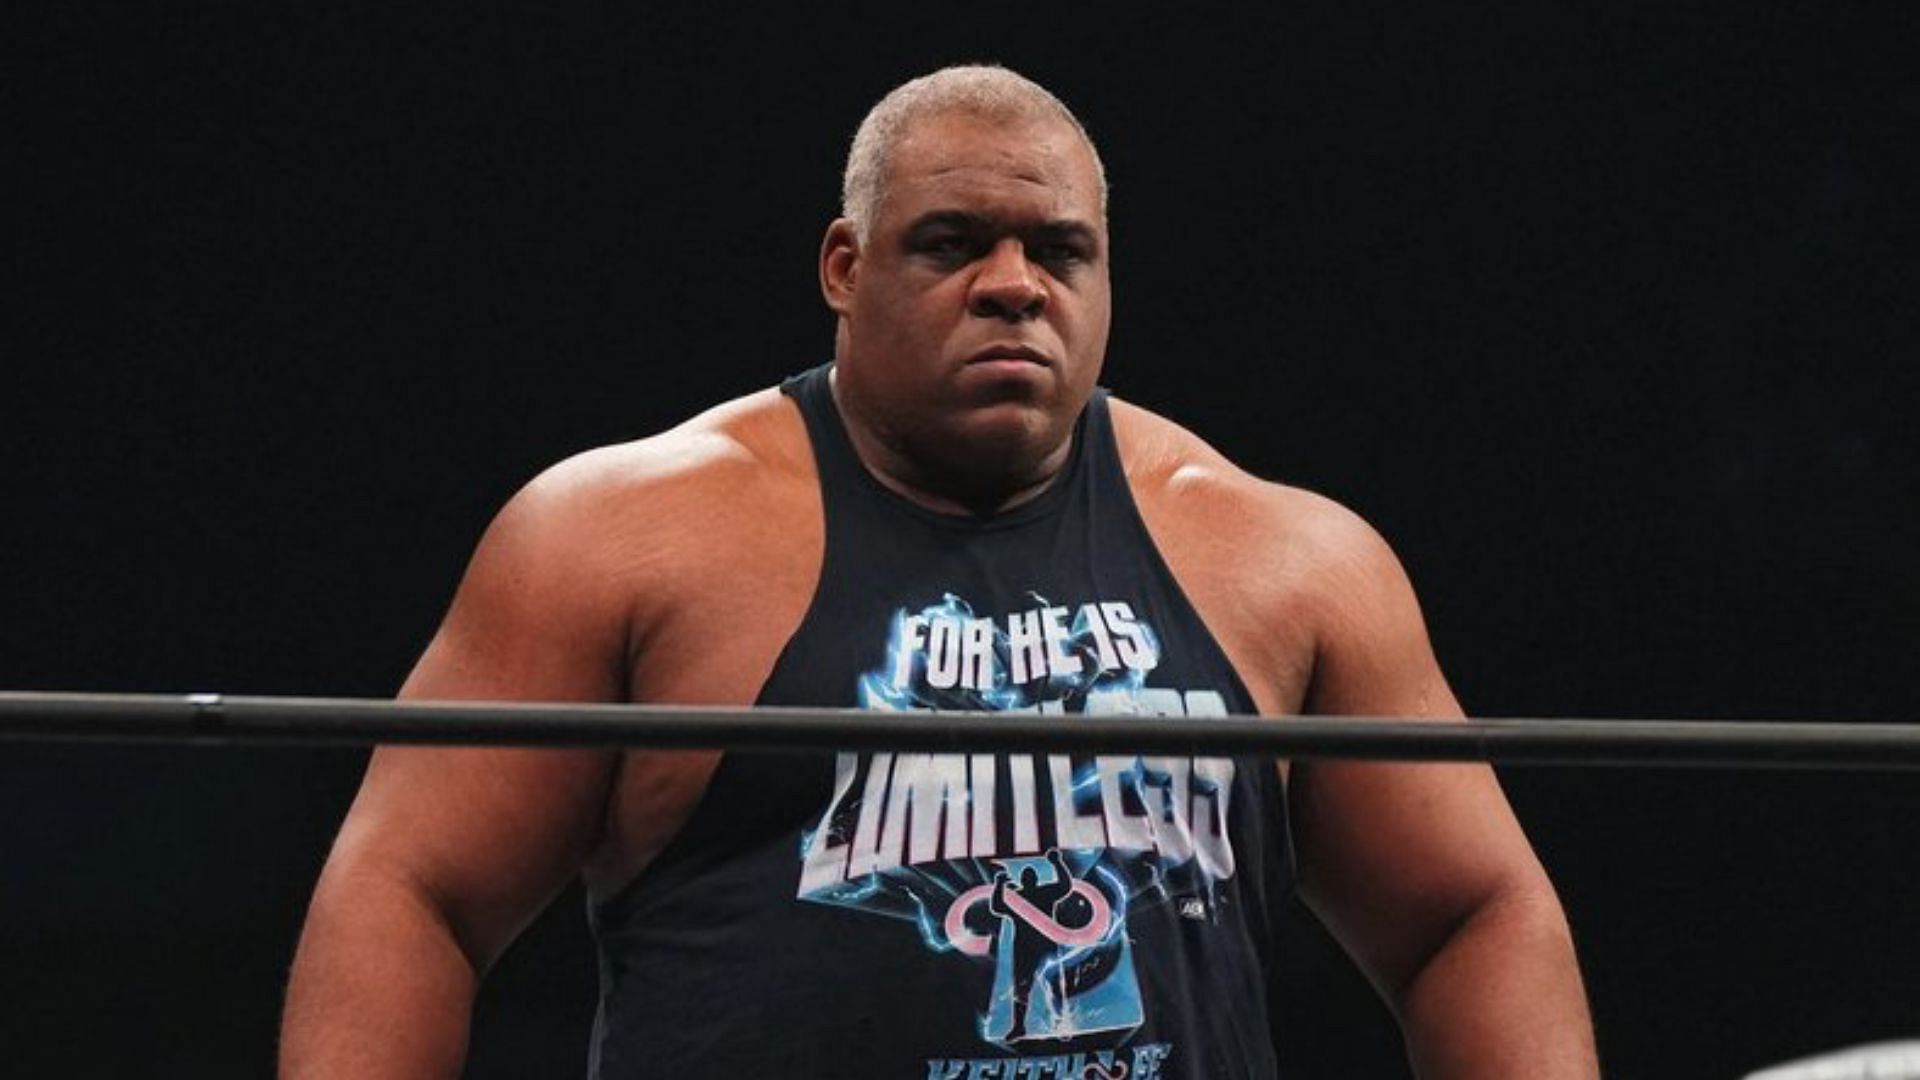 Keith Lee provided an update on his injury 